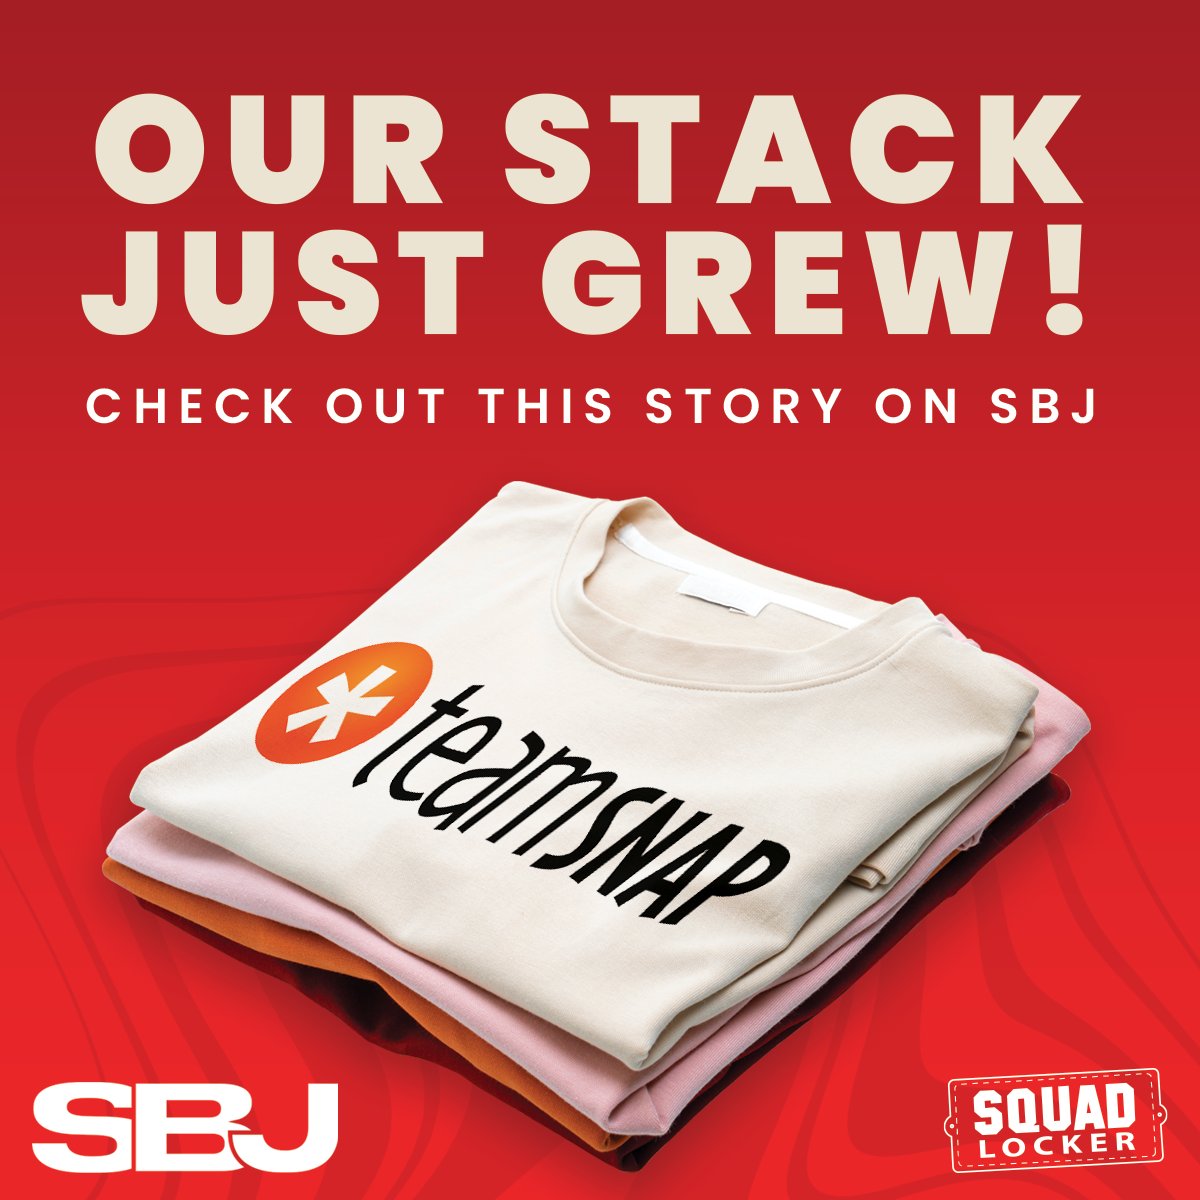 Our stack just grew! Check out the story on @SBJ tinyurl.com/447pajyj #WeLoveTeams @teamsnap #Partnerships #News